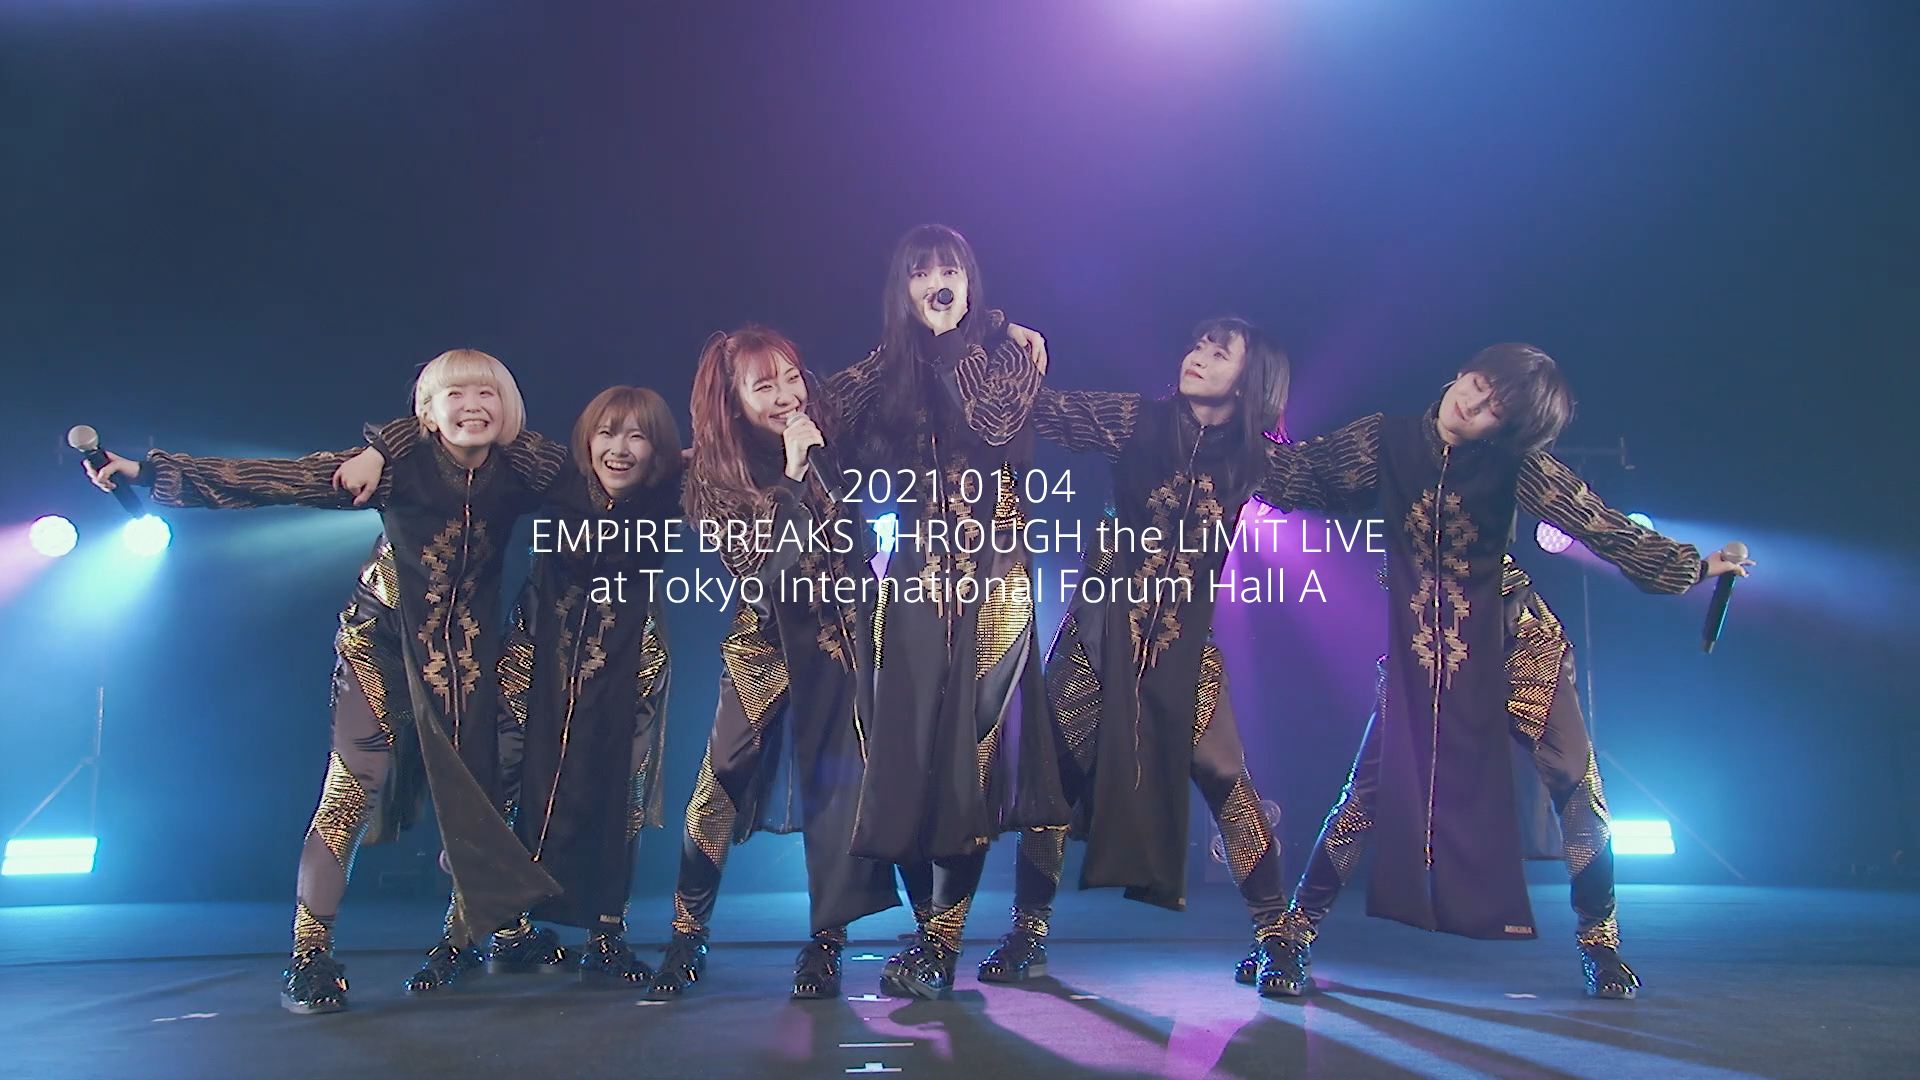 『EMPiRE BREAKS THROUGH the LiMiT LiVE』より「MAD LOVE」サムネイル